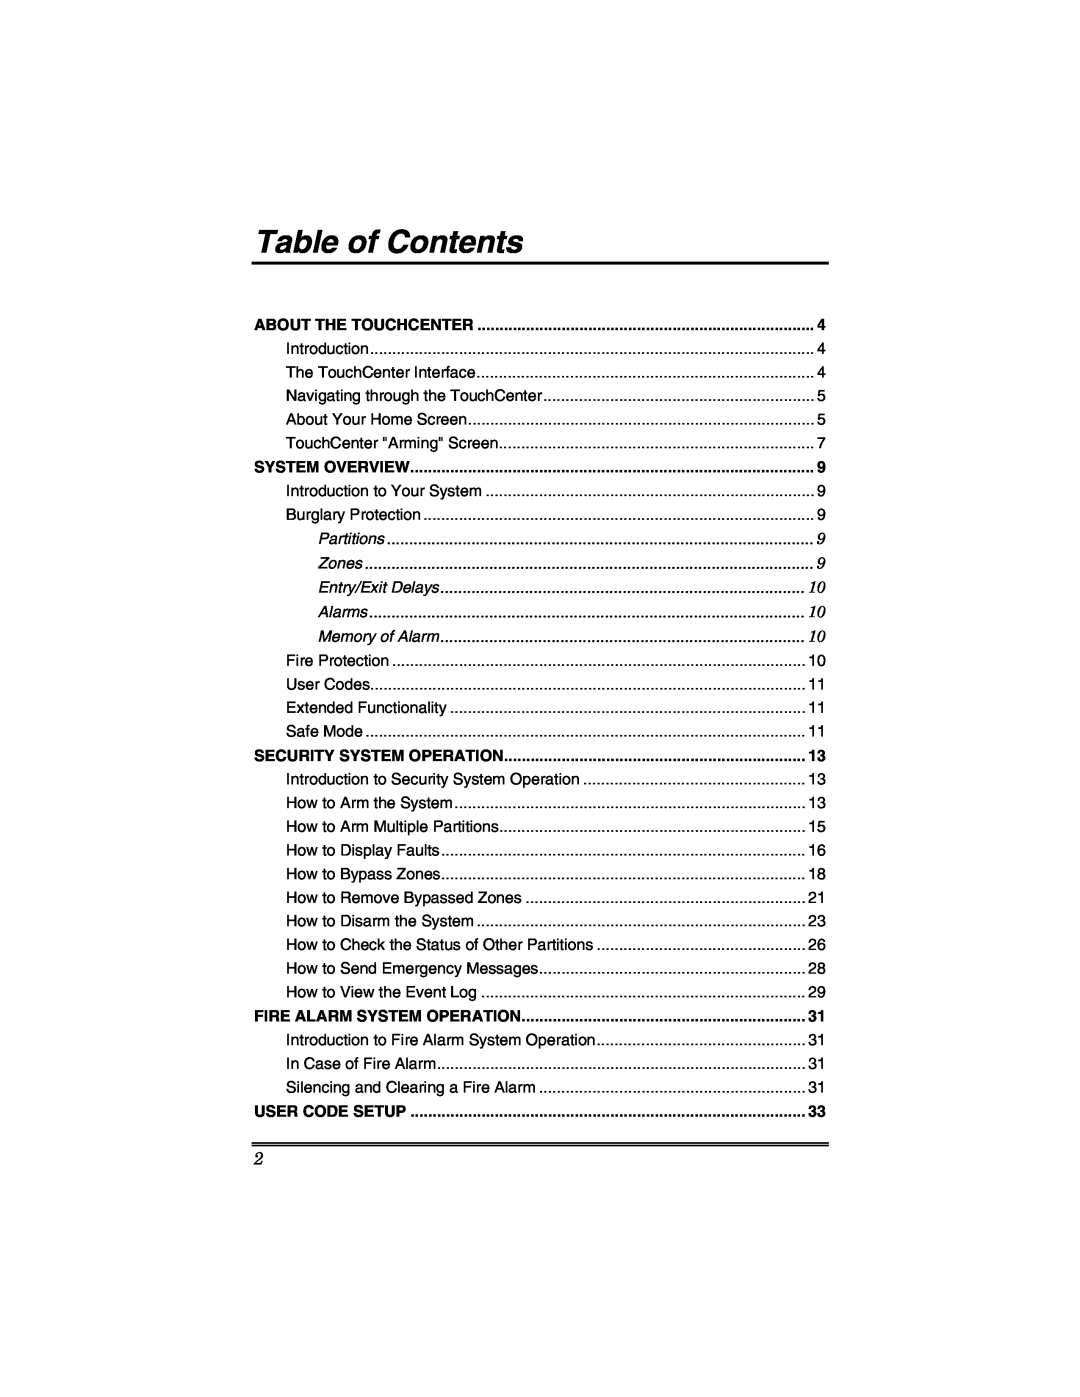 Honeywell 6271V Table of Contents, About The Touchcenter, System Overview, Partitions, Zones, Entry/Exit Delays, Alarms 